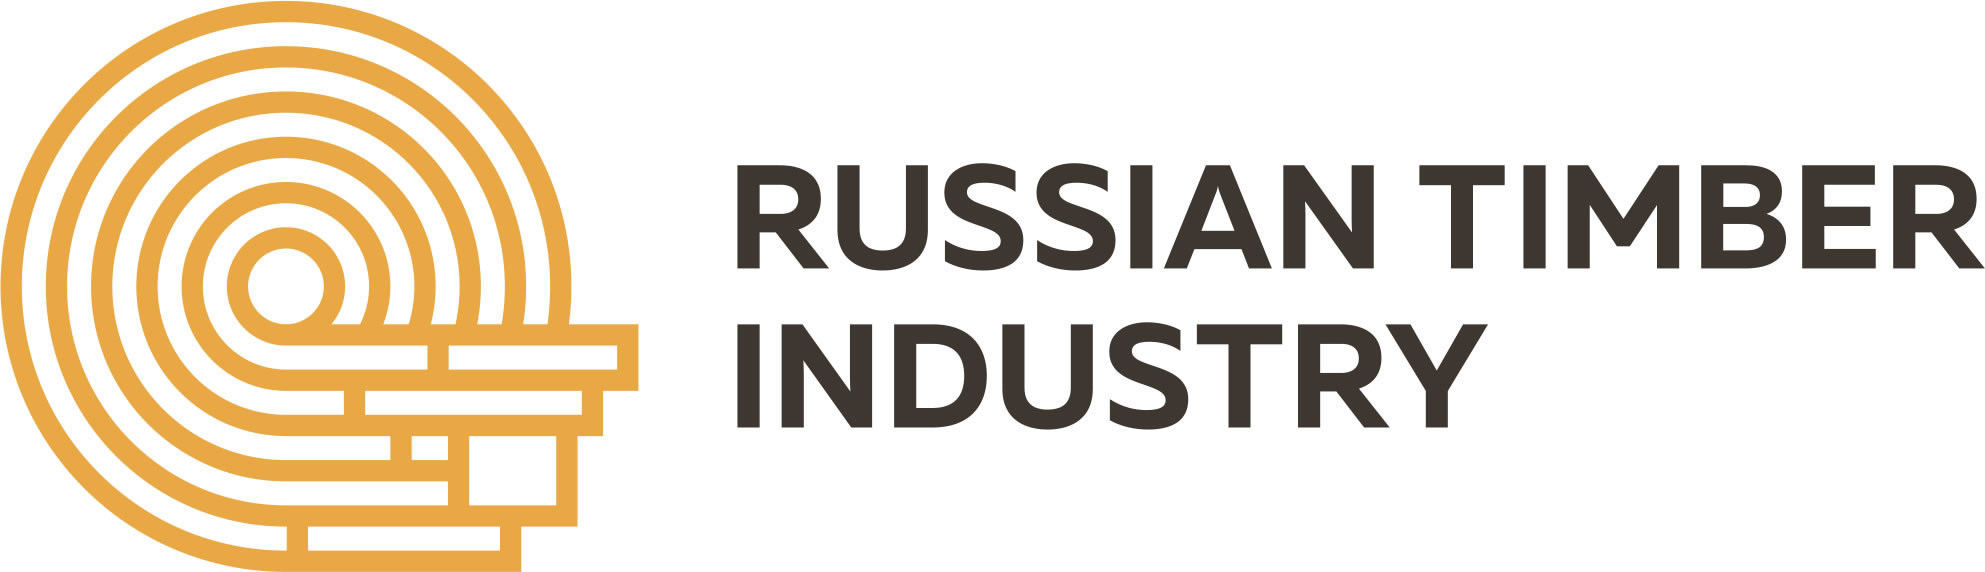 Russian Timber Industry Complex Tic 54